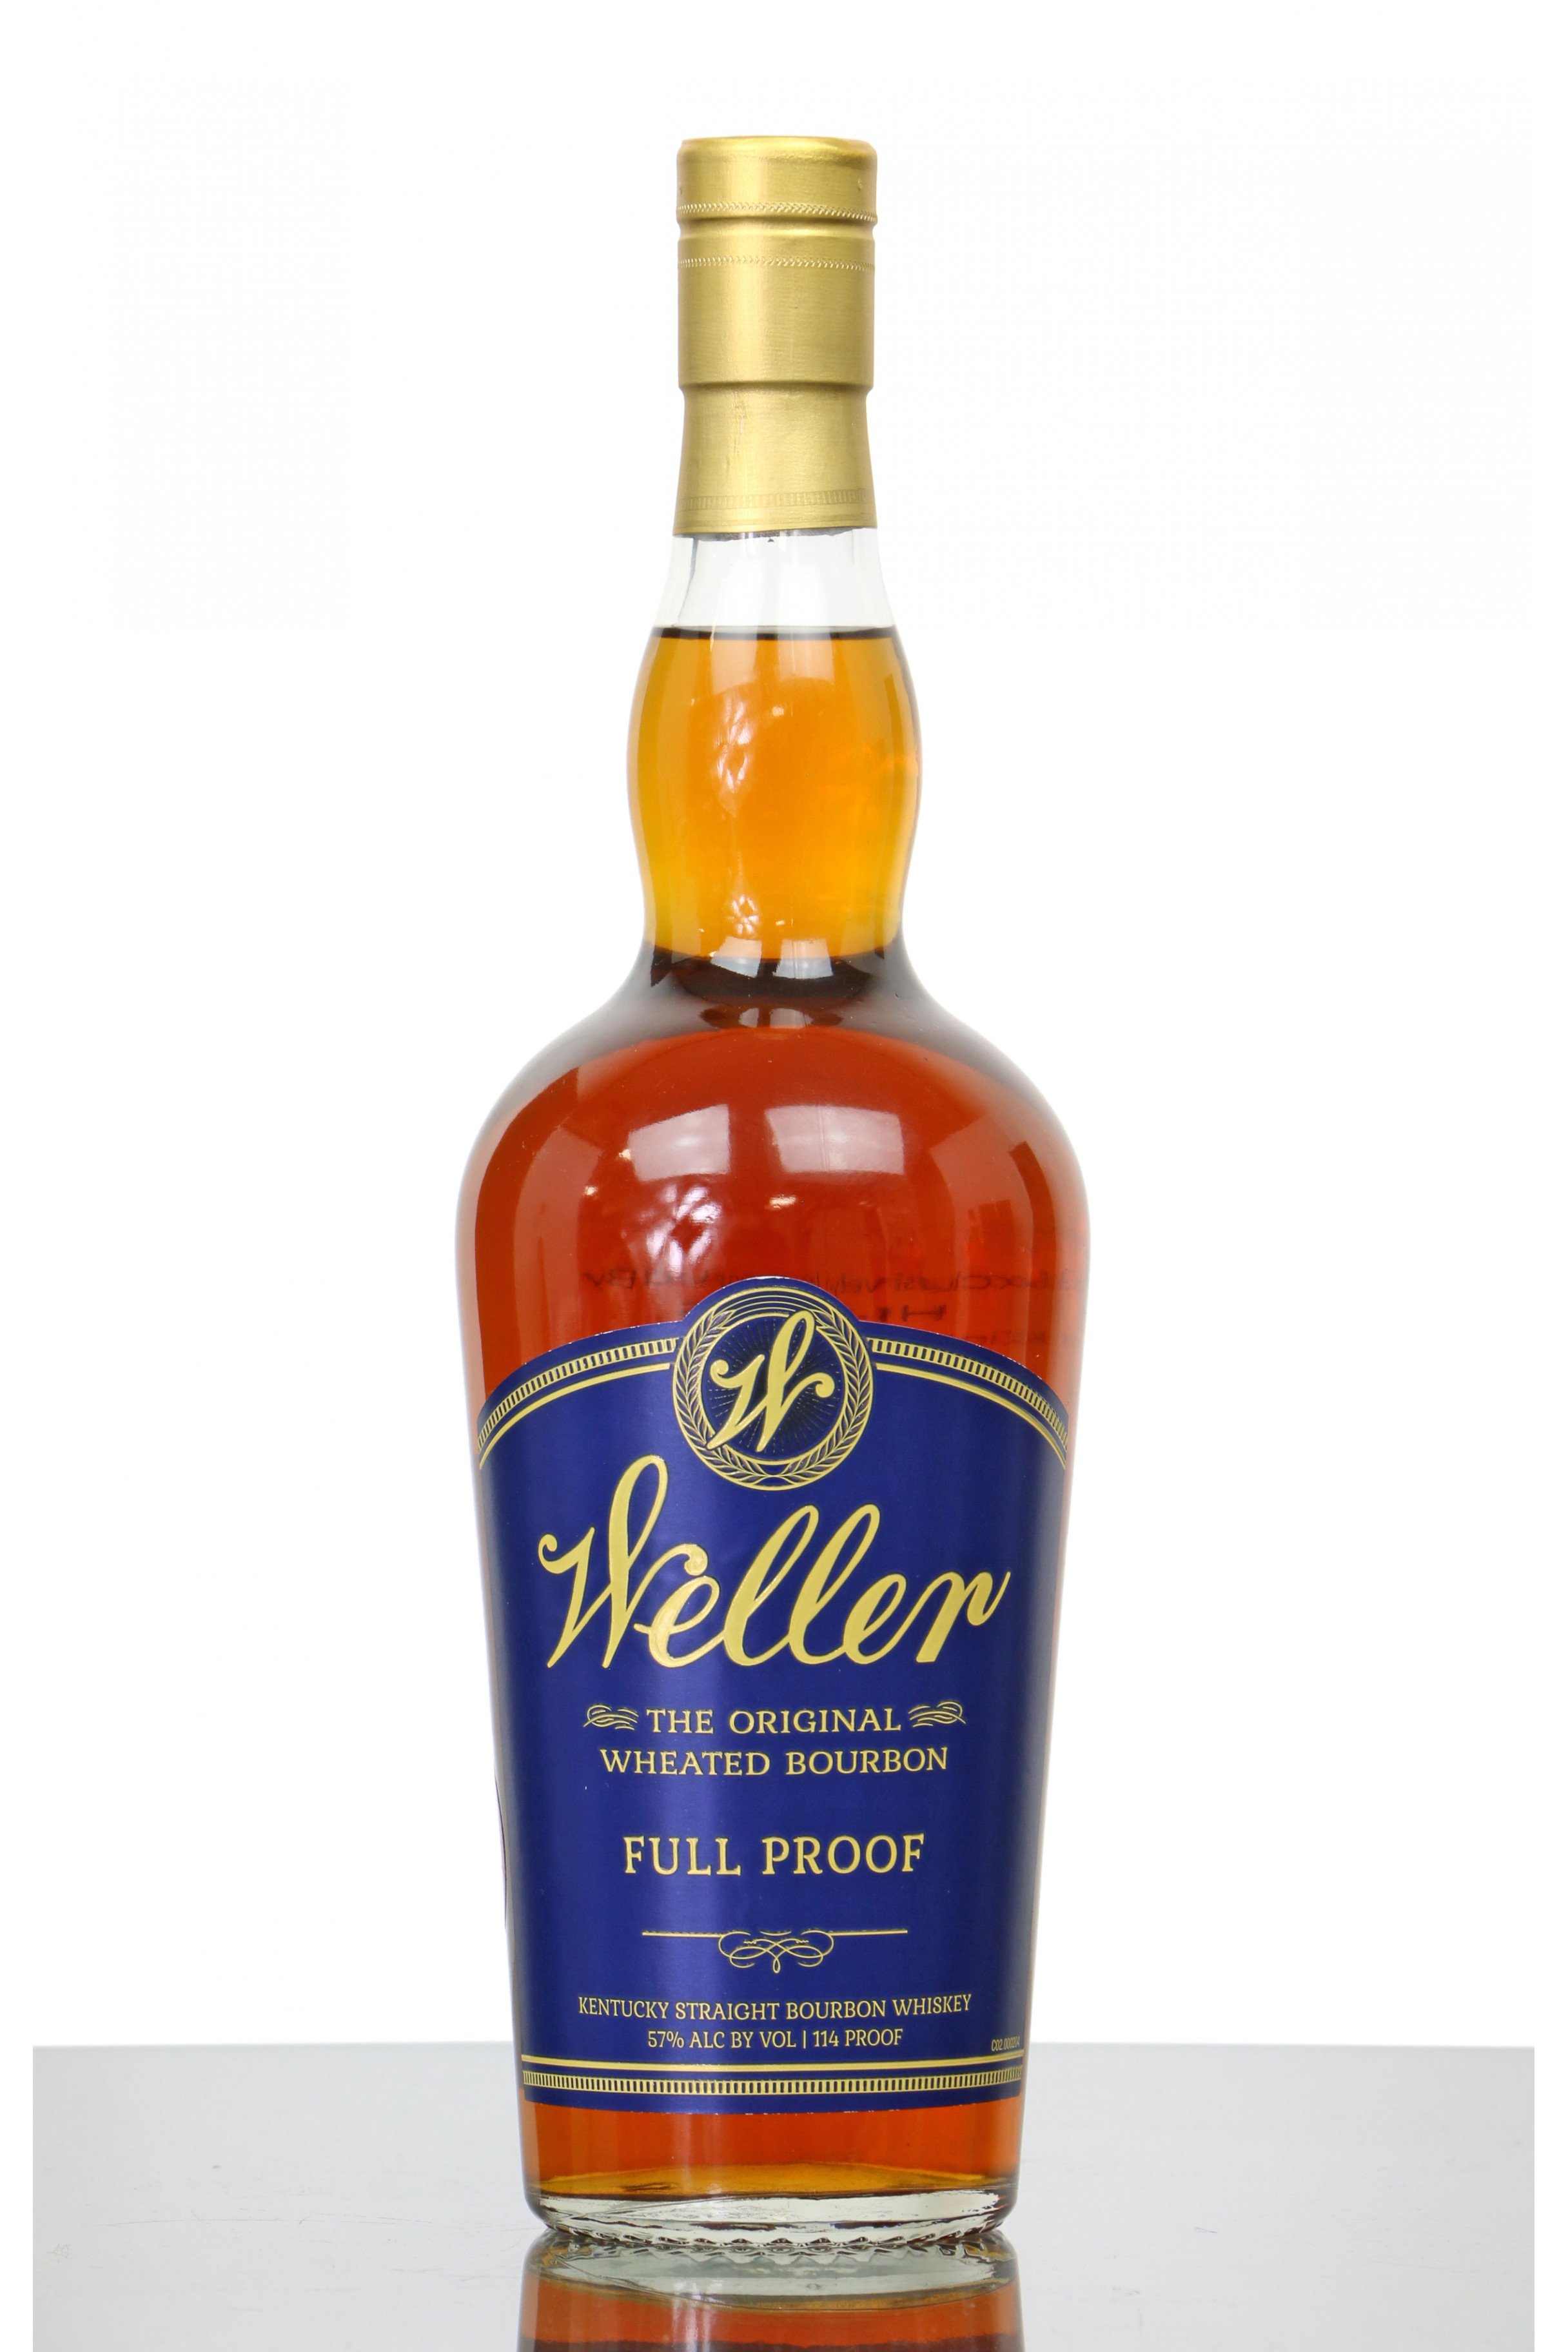 Weller Bourbon Price How do you Price a Switches?